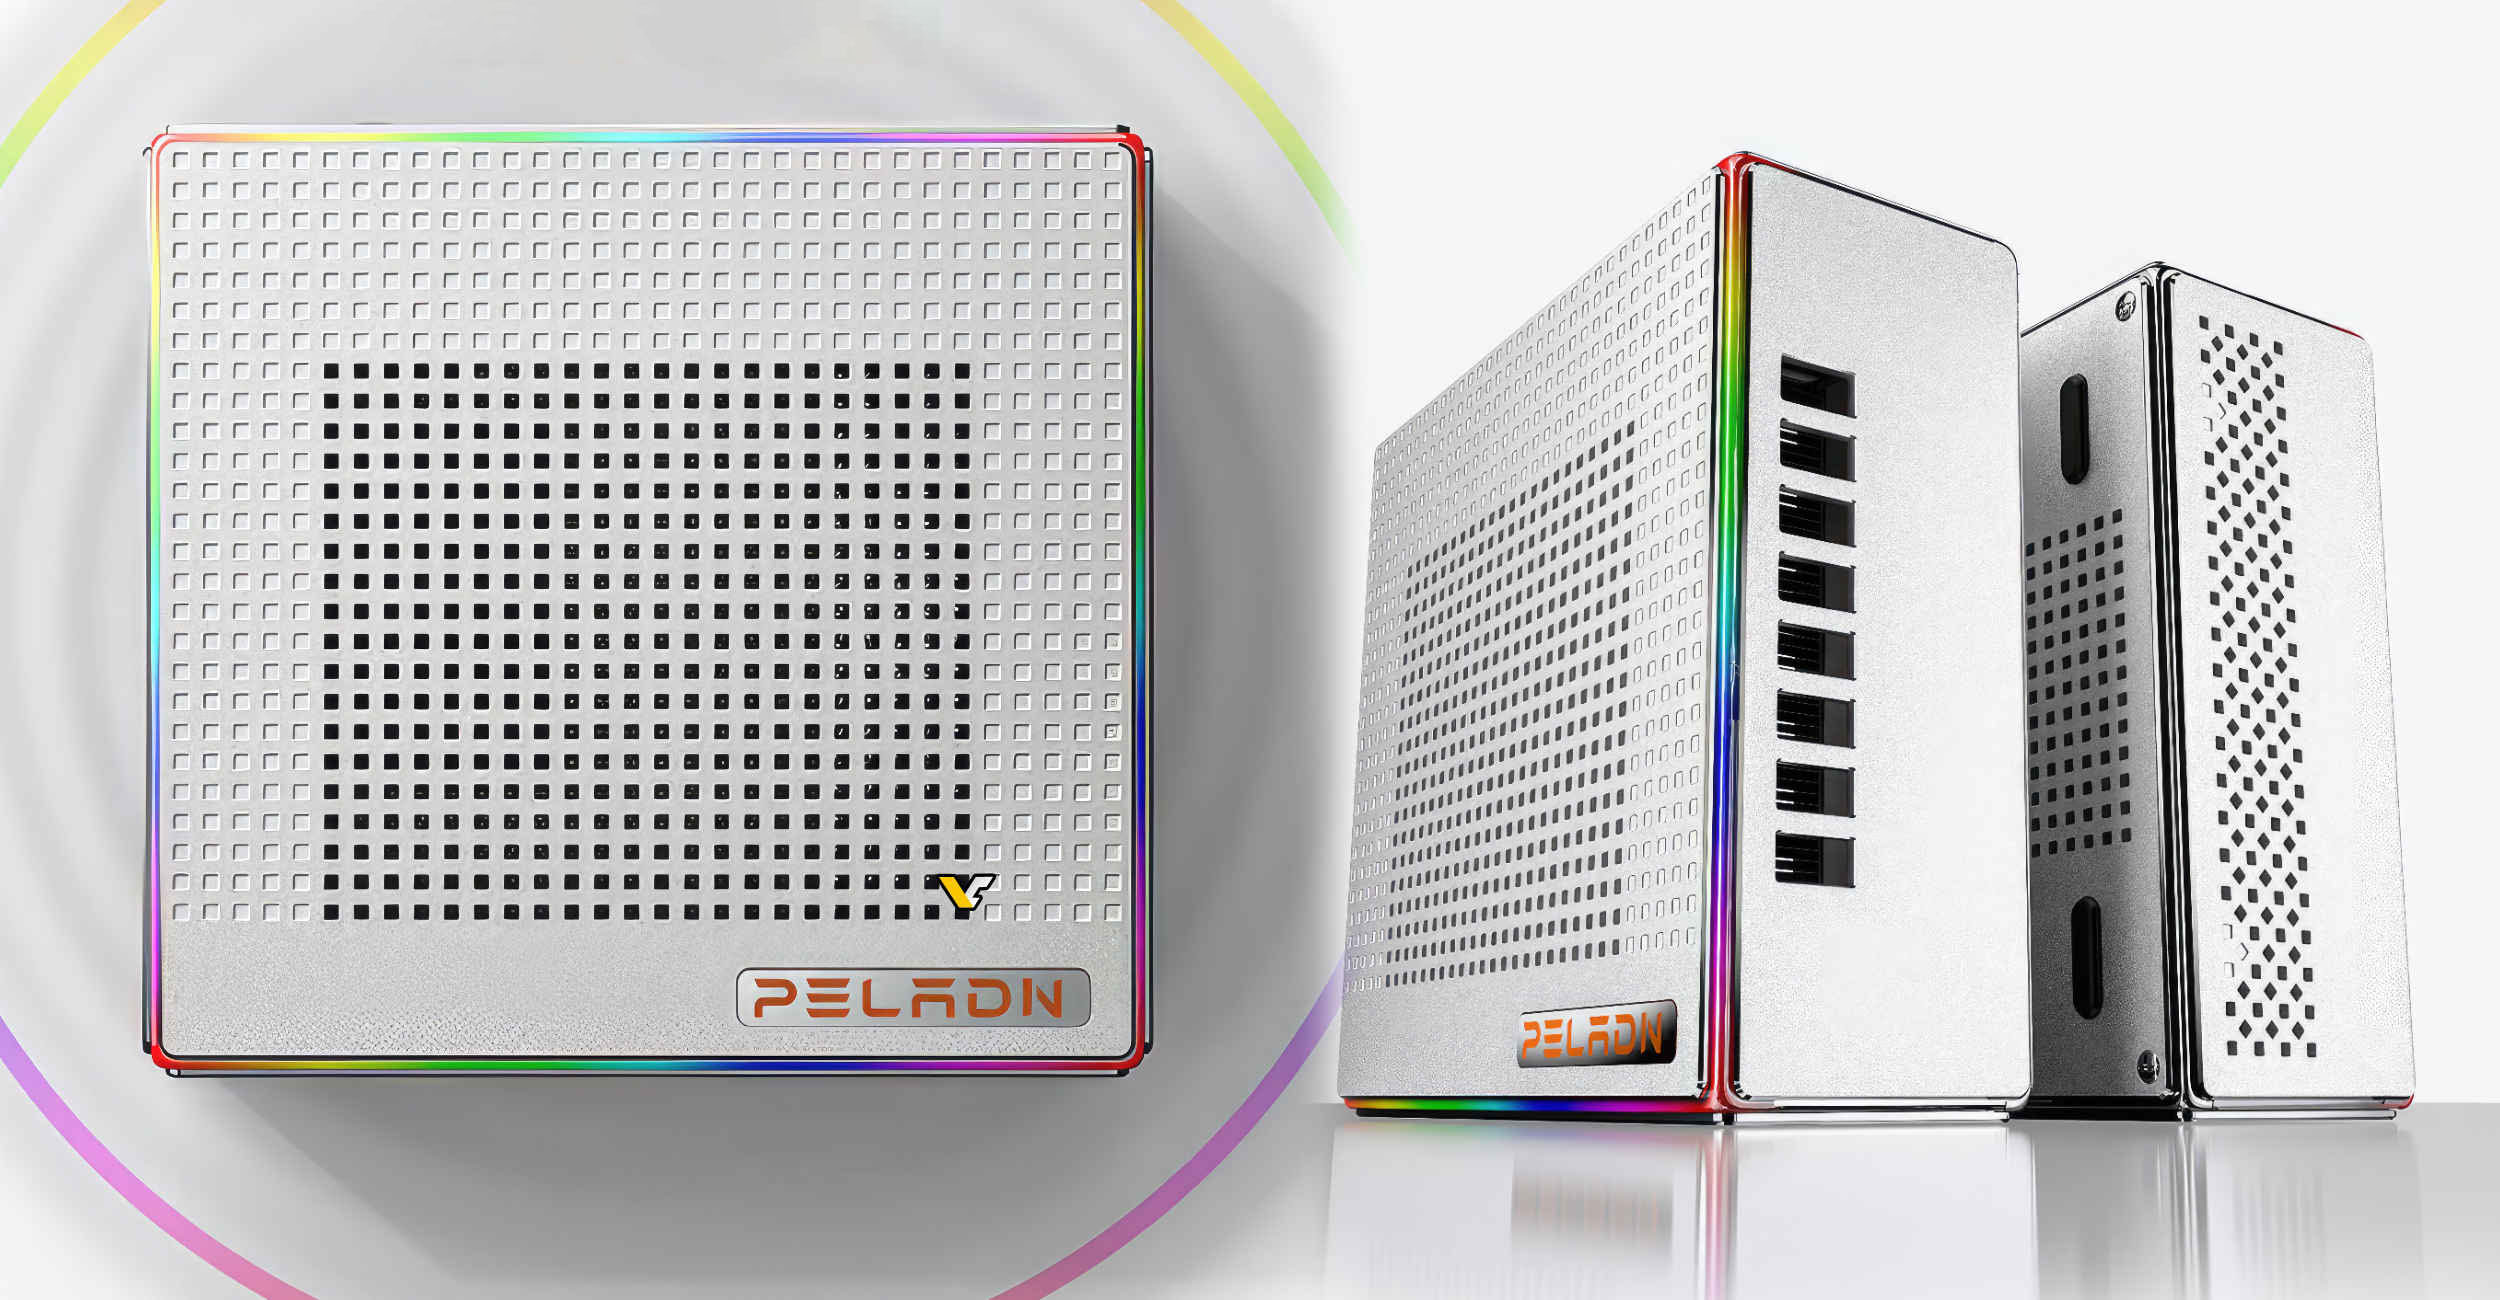 This AMD Ryzen 7 7840HS Mini-PC is all about RGB lighting